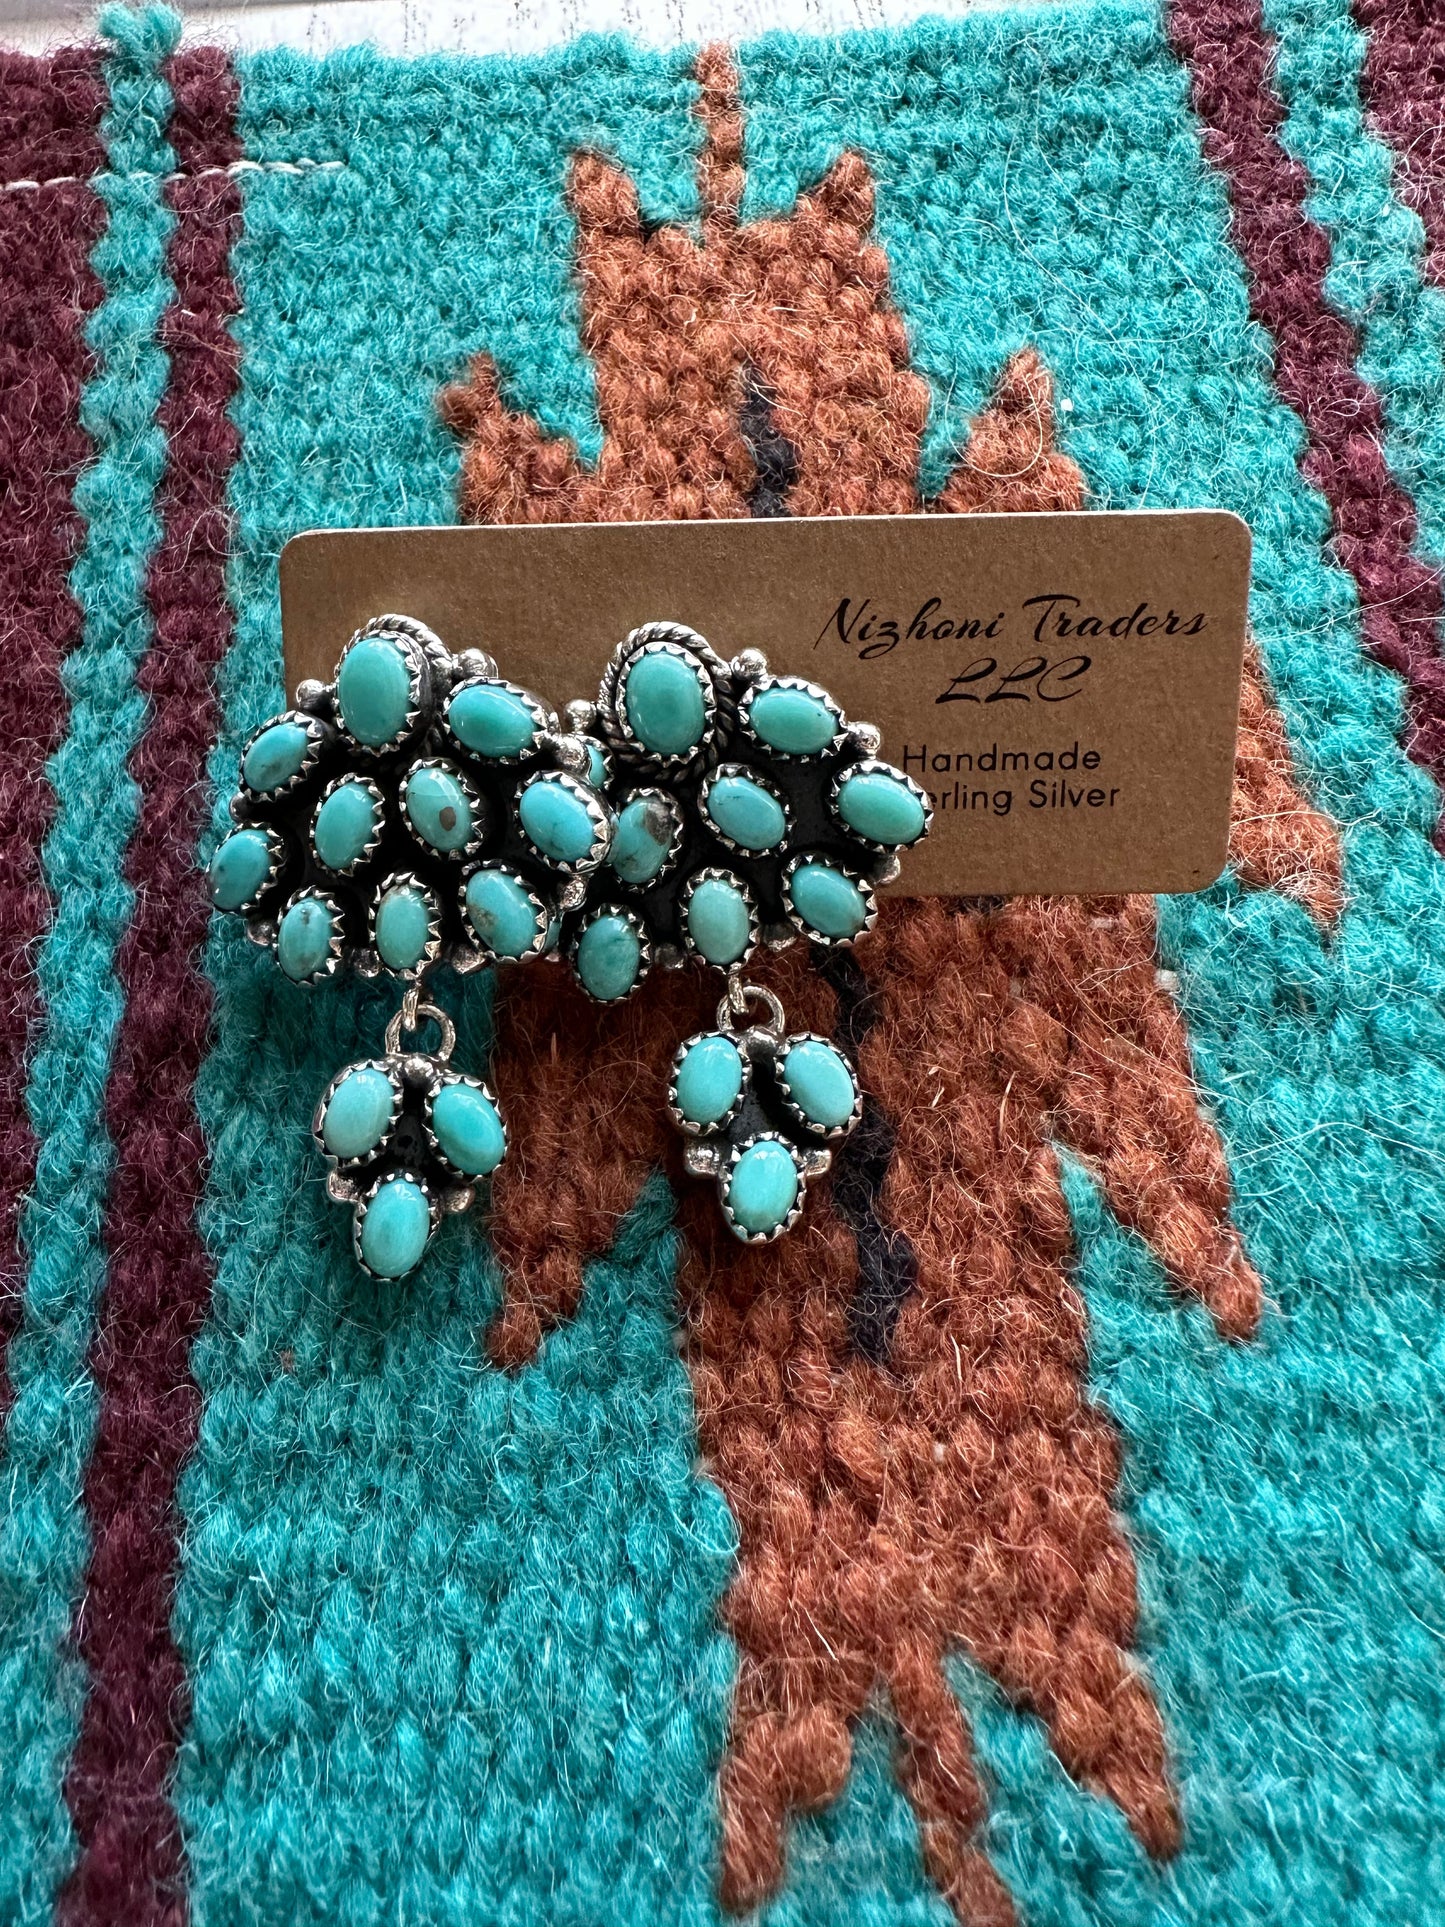 “Cowgirl Charms” Handmade Turquoise And Sterling Silver Dangle Earrings Signed Nizhoni i